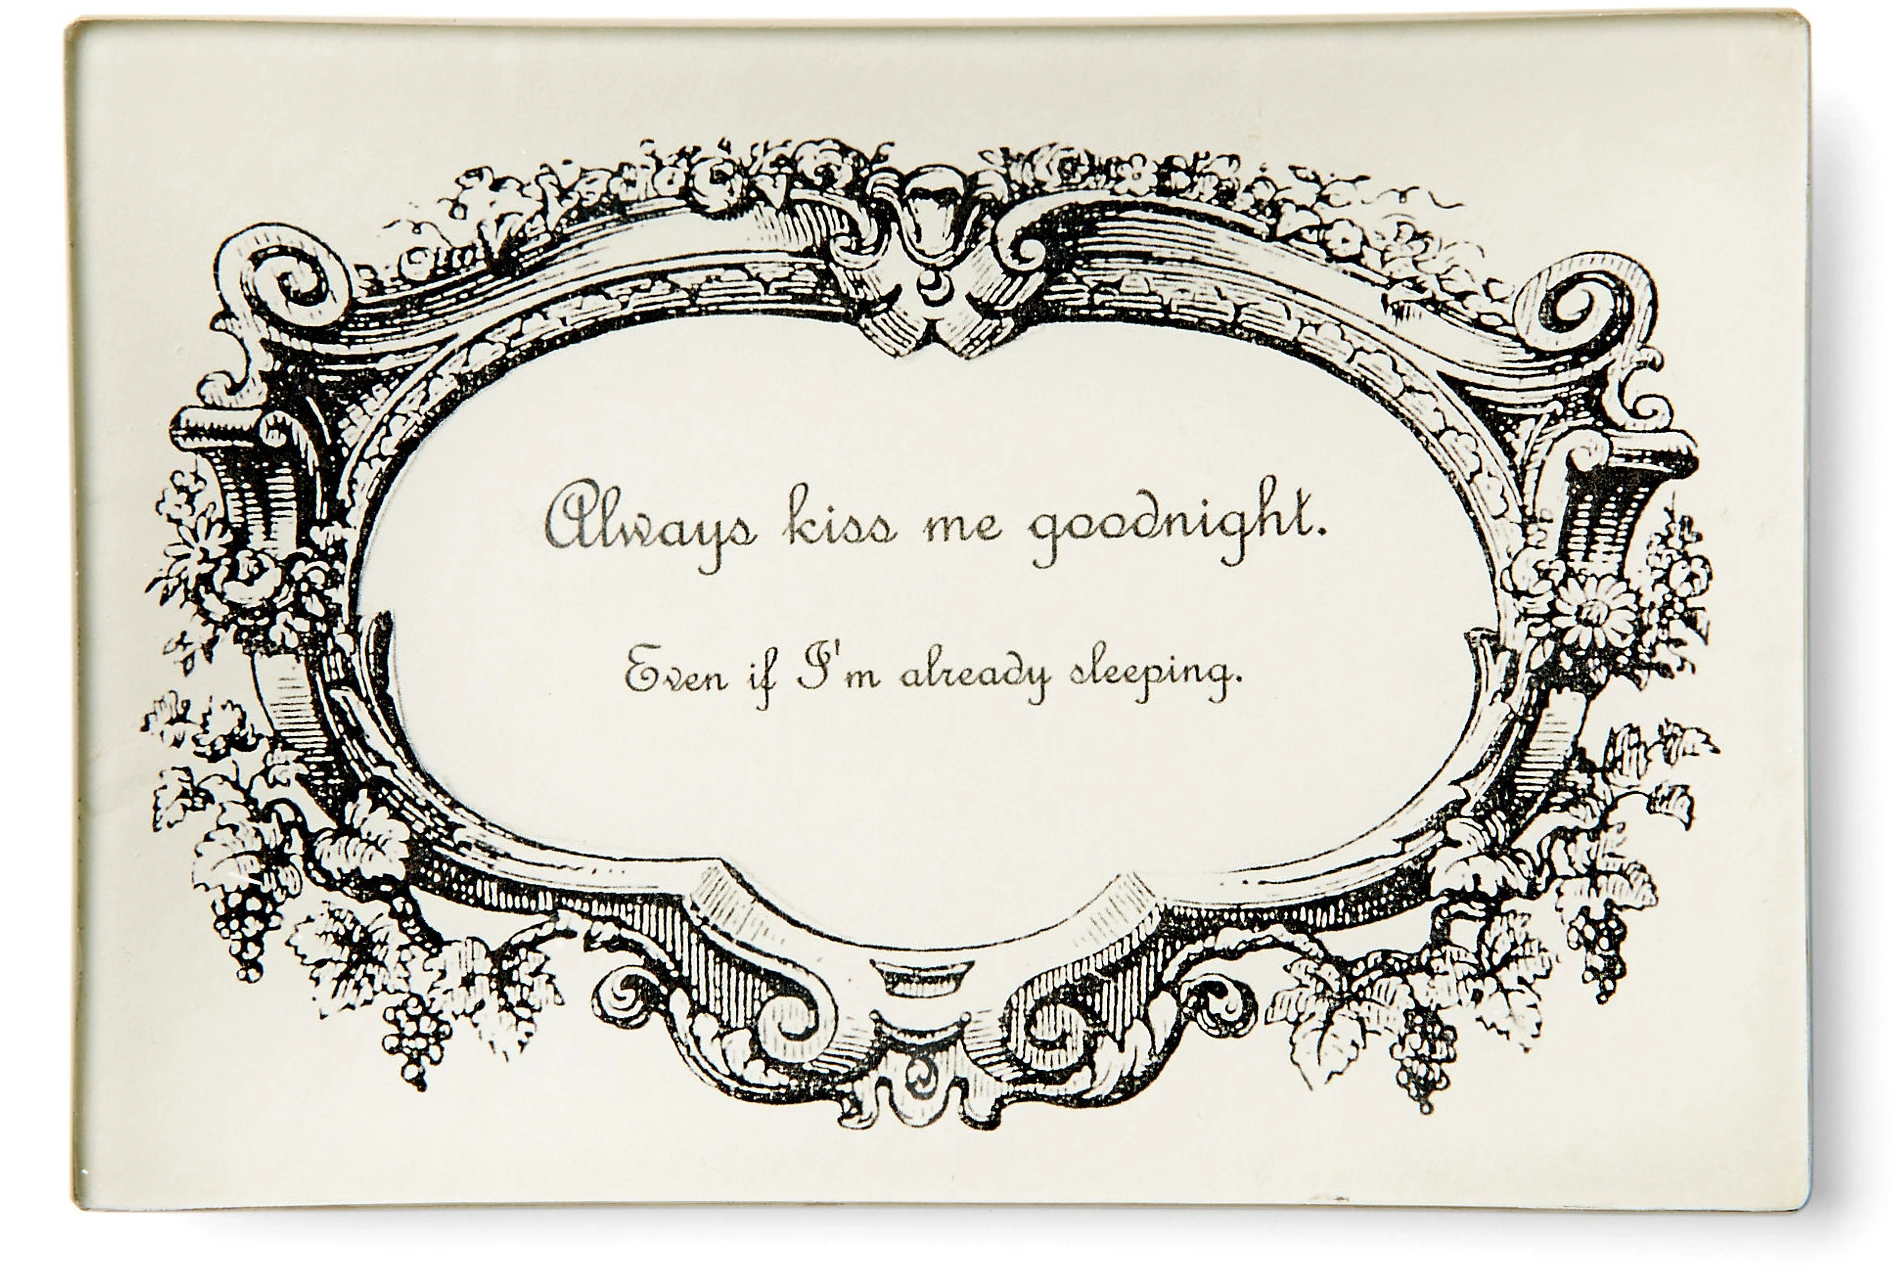 Goodnight Kiss Tray from One Kings Lane